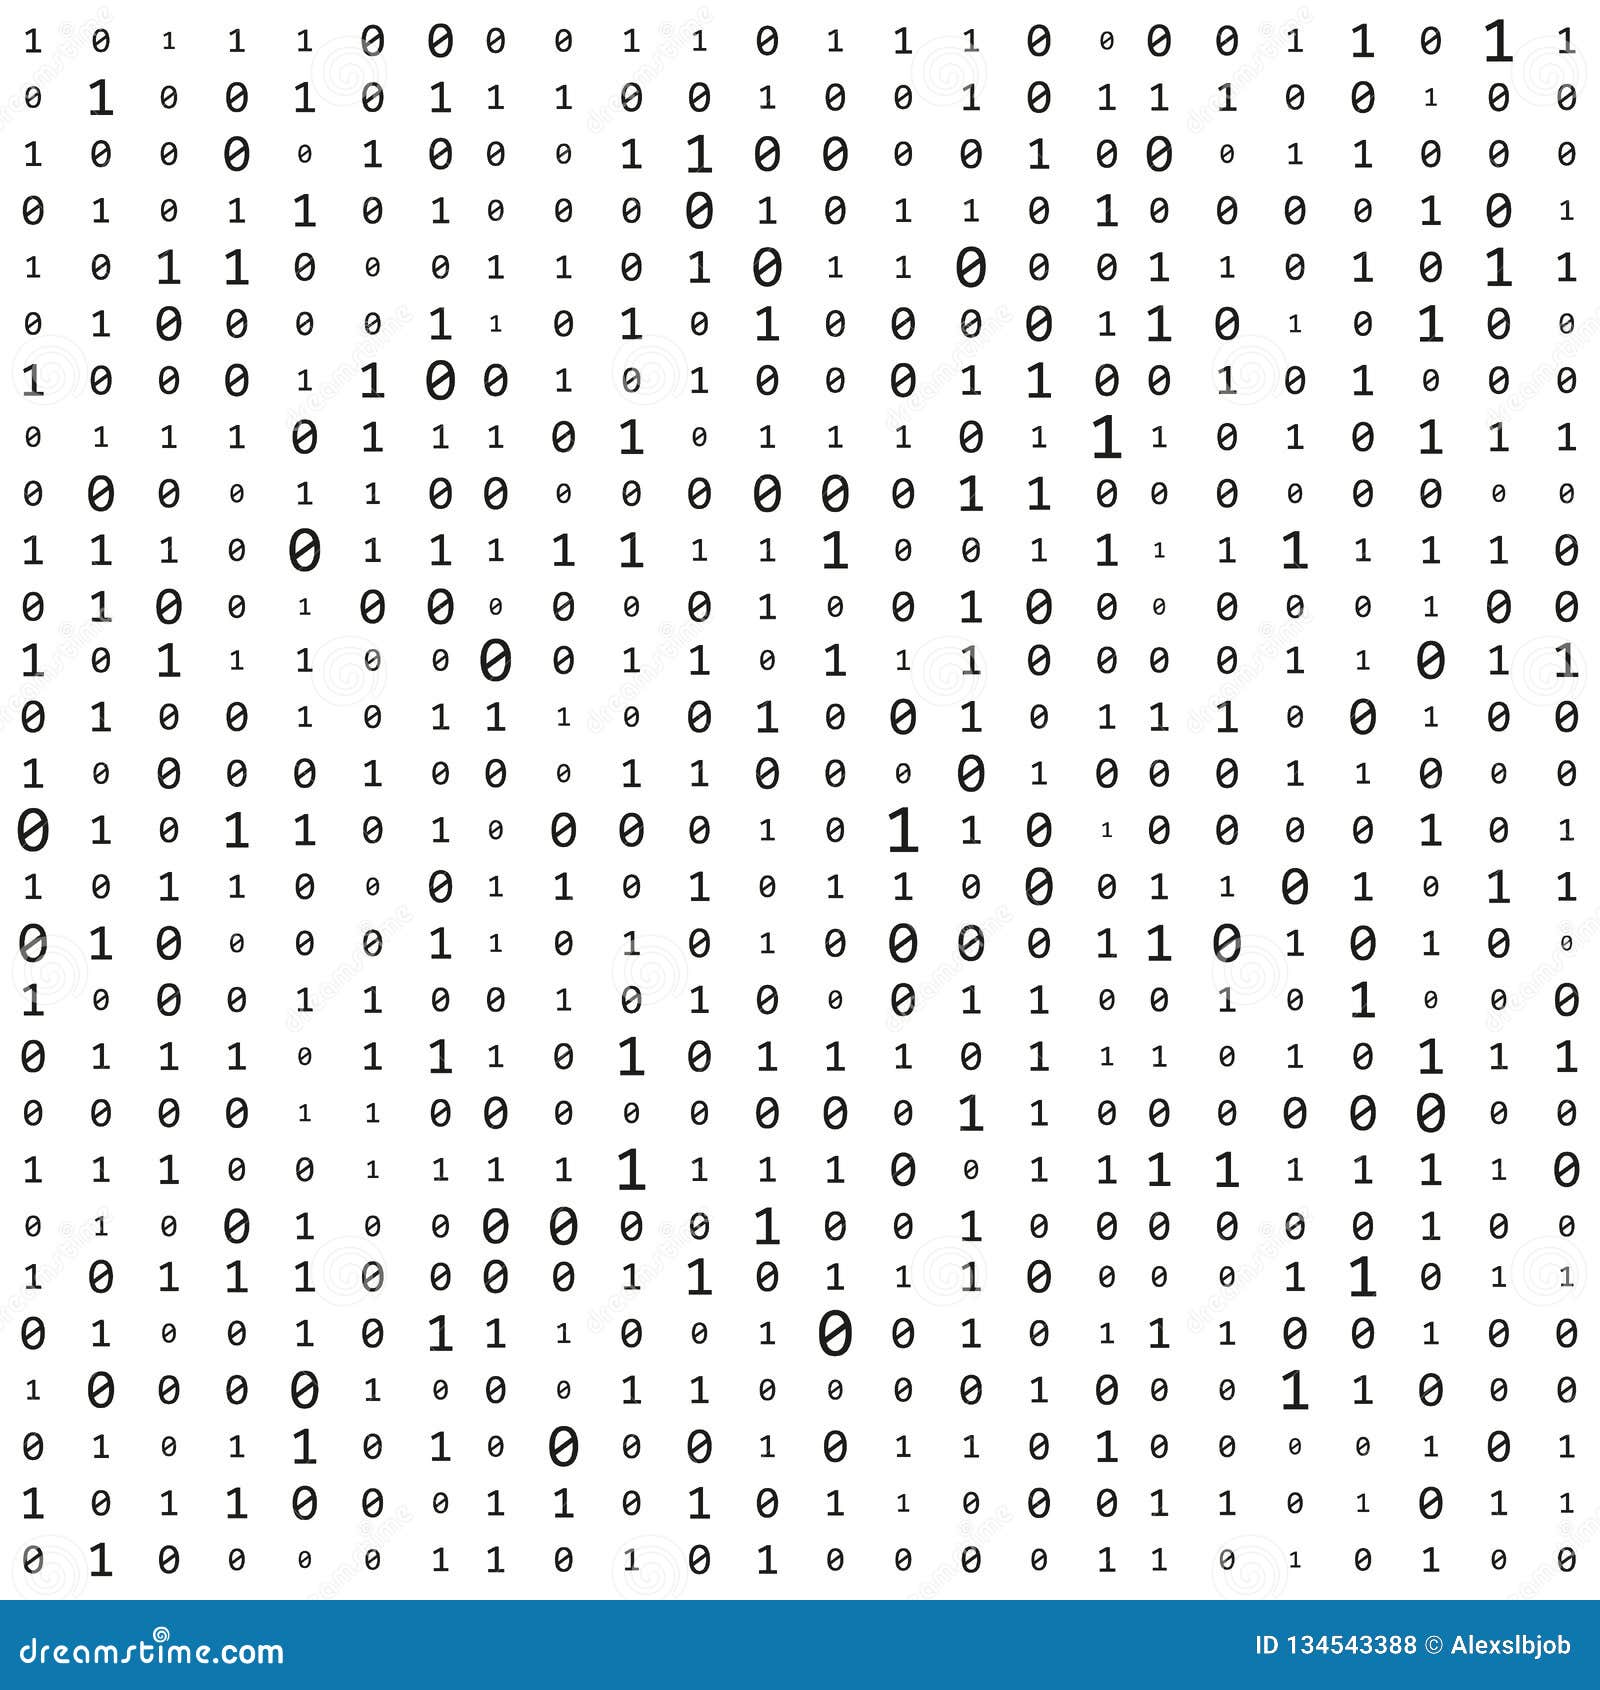 Download wallpaper background, code, binary, programming, section